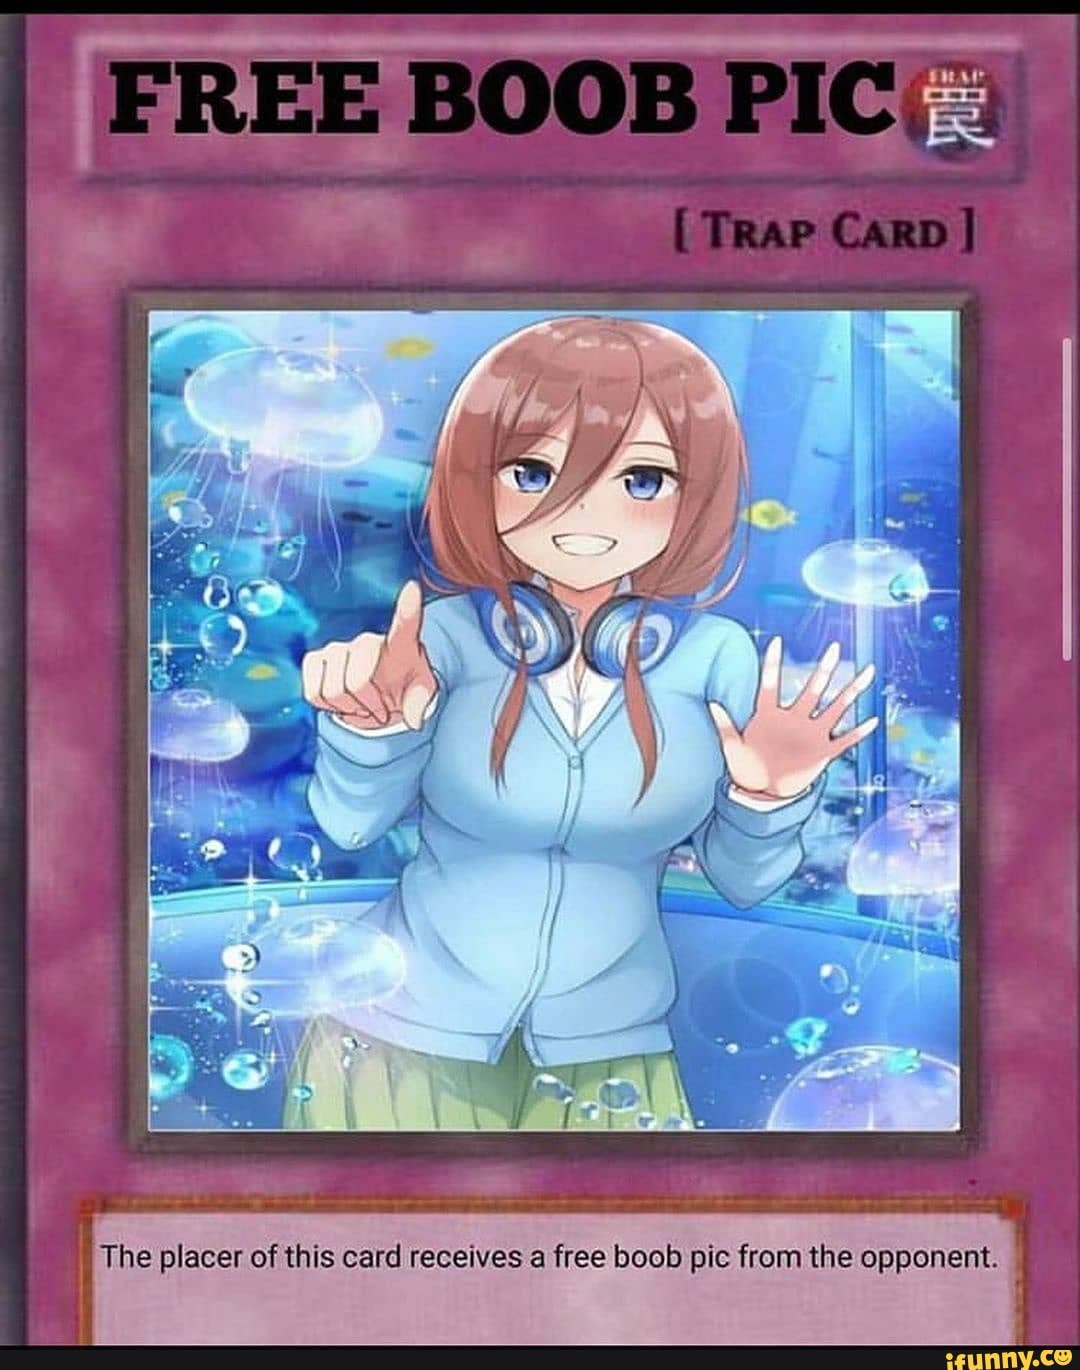 Free Boob Pic Trap Card The Placer Of This Card Receives A Free Boob Pic From The Opponent 